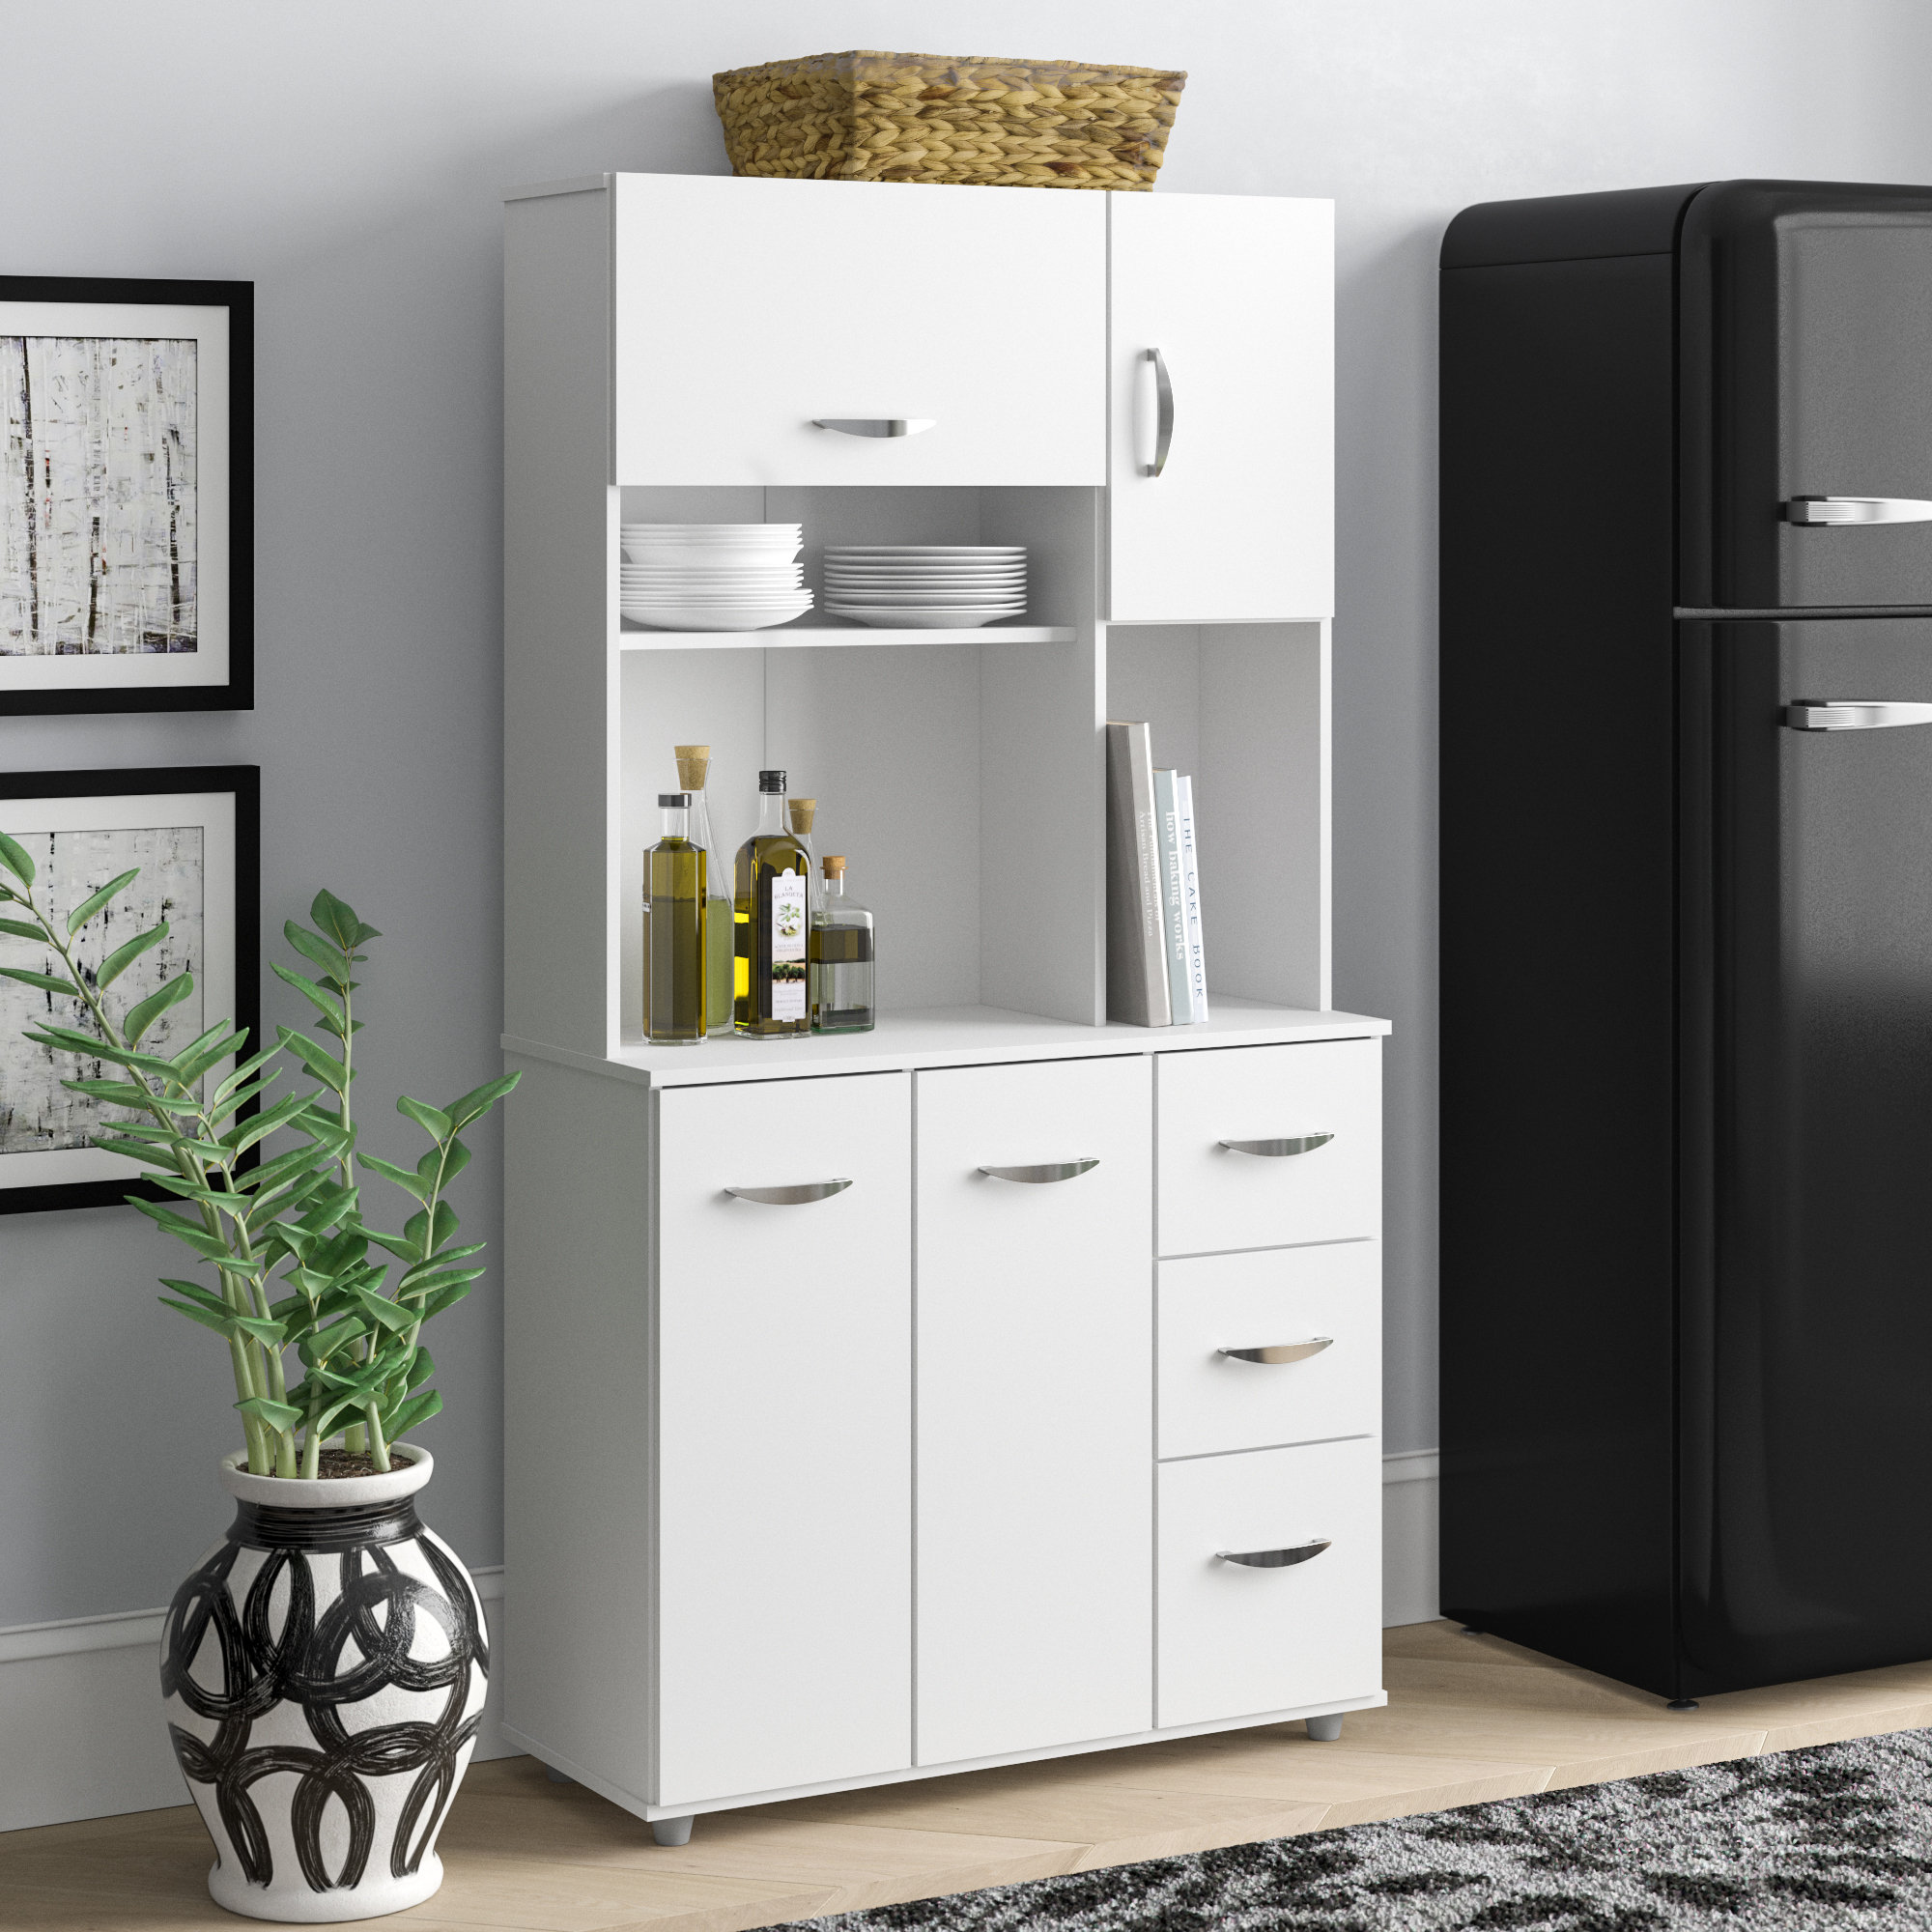 Small Pantry Cabinets You Ll Love In 2020 Wayfair